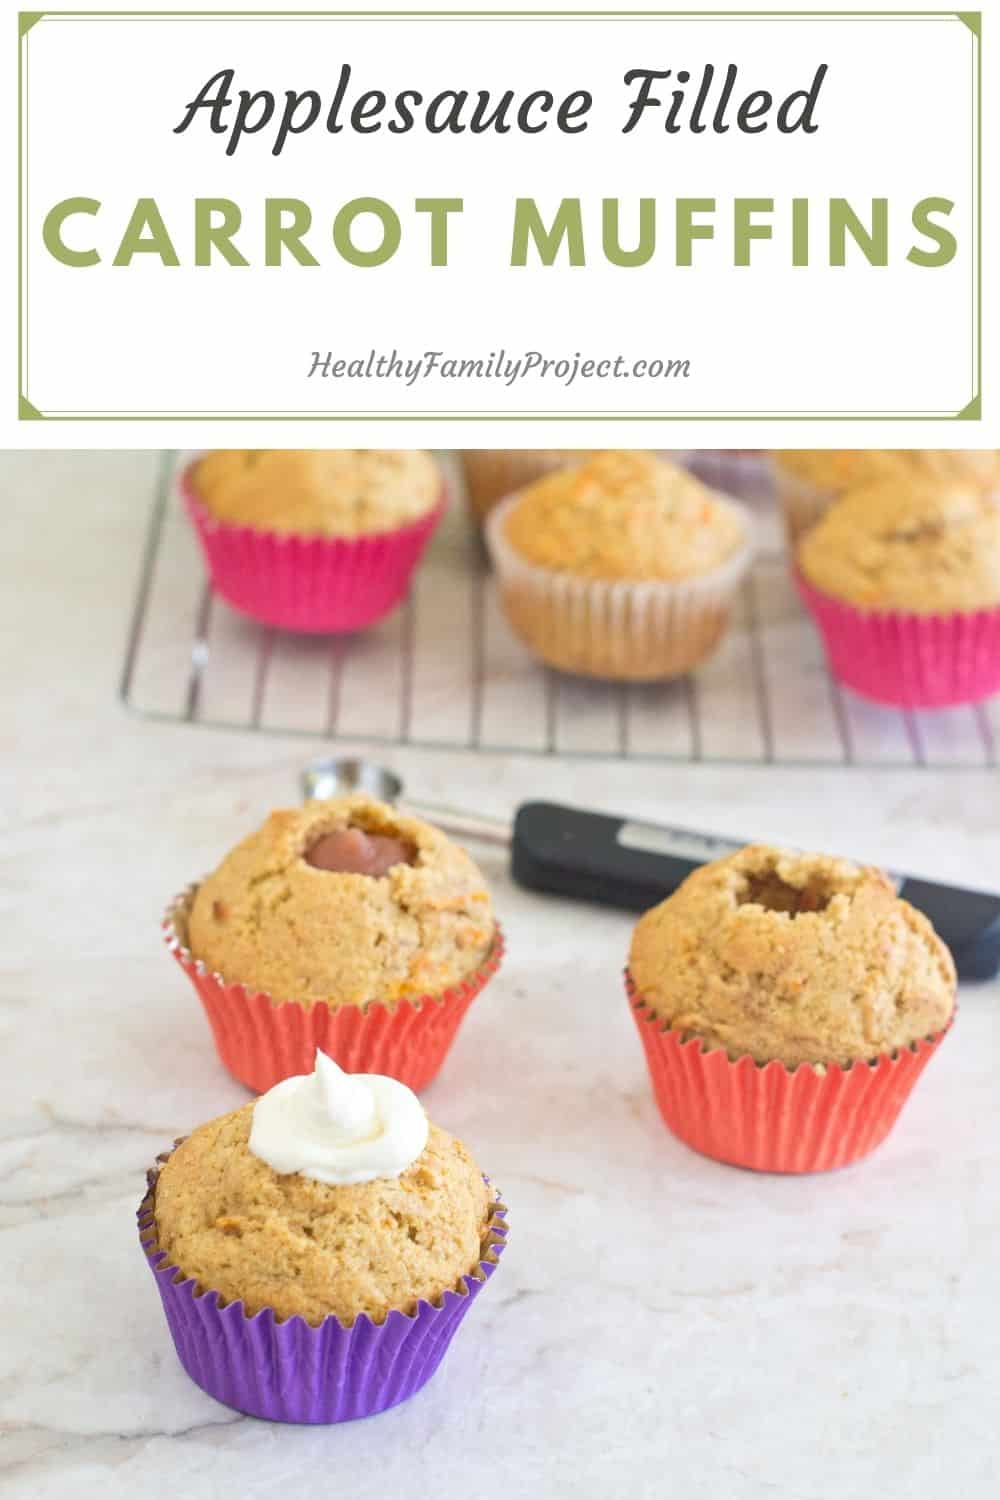 applesauce filled carrot muffins with a Greek Yogurt frosting 